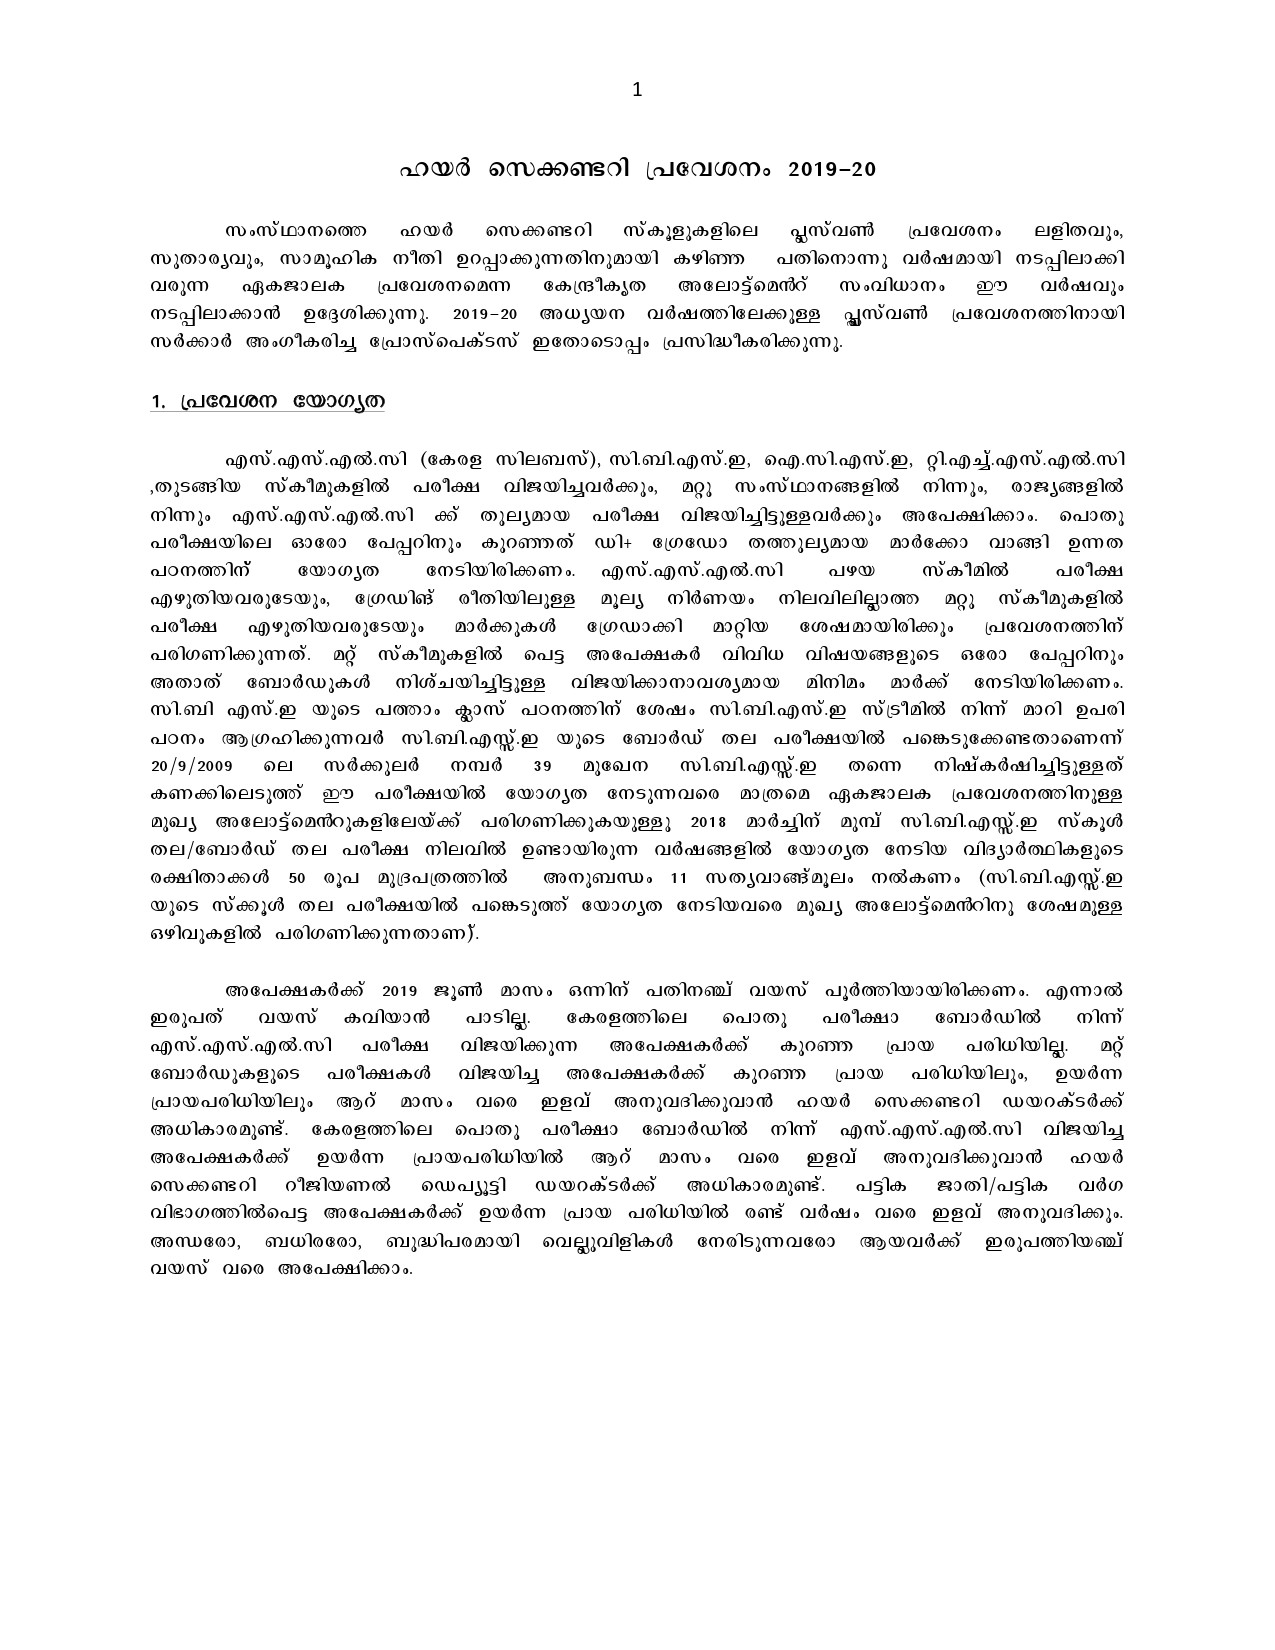 How To Apply For Kerala Higher Secondary Admission 2019 - Notification Image 1